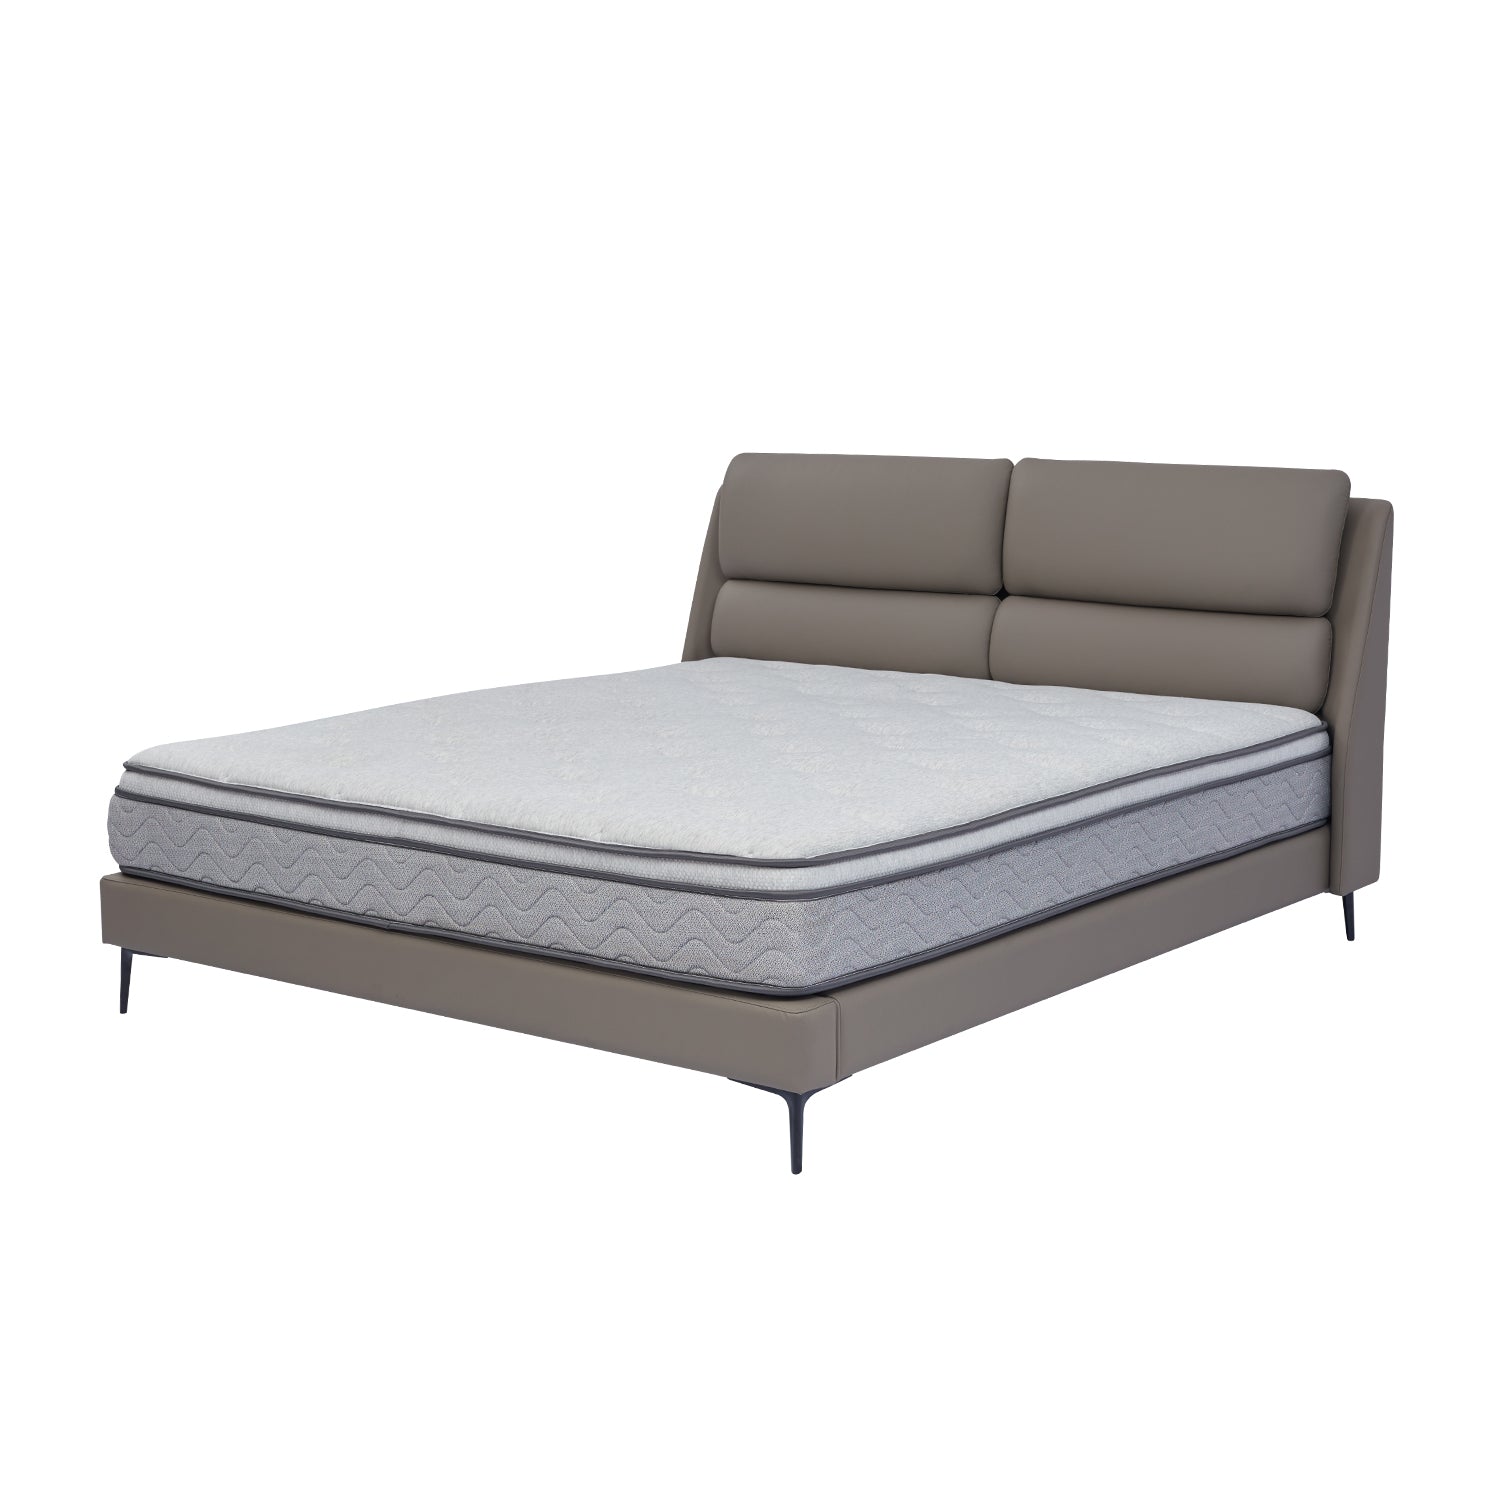 Modern bed frame BOC1-019 with grey upholstered headboard and high-quality mattress from DeRUCCI, featuring slim black legs and matching grey fabric or leather upholstery.